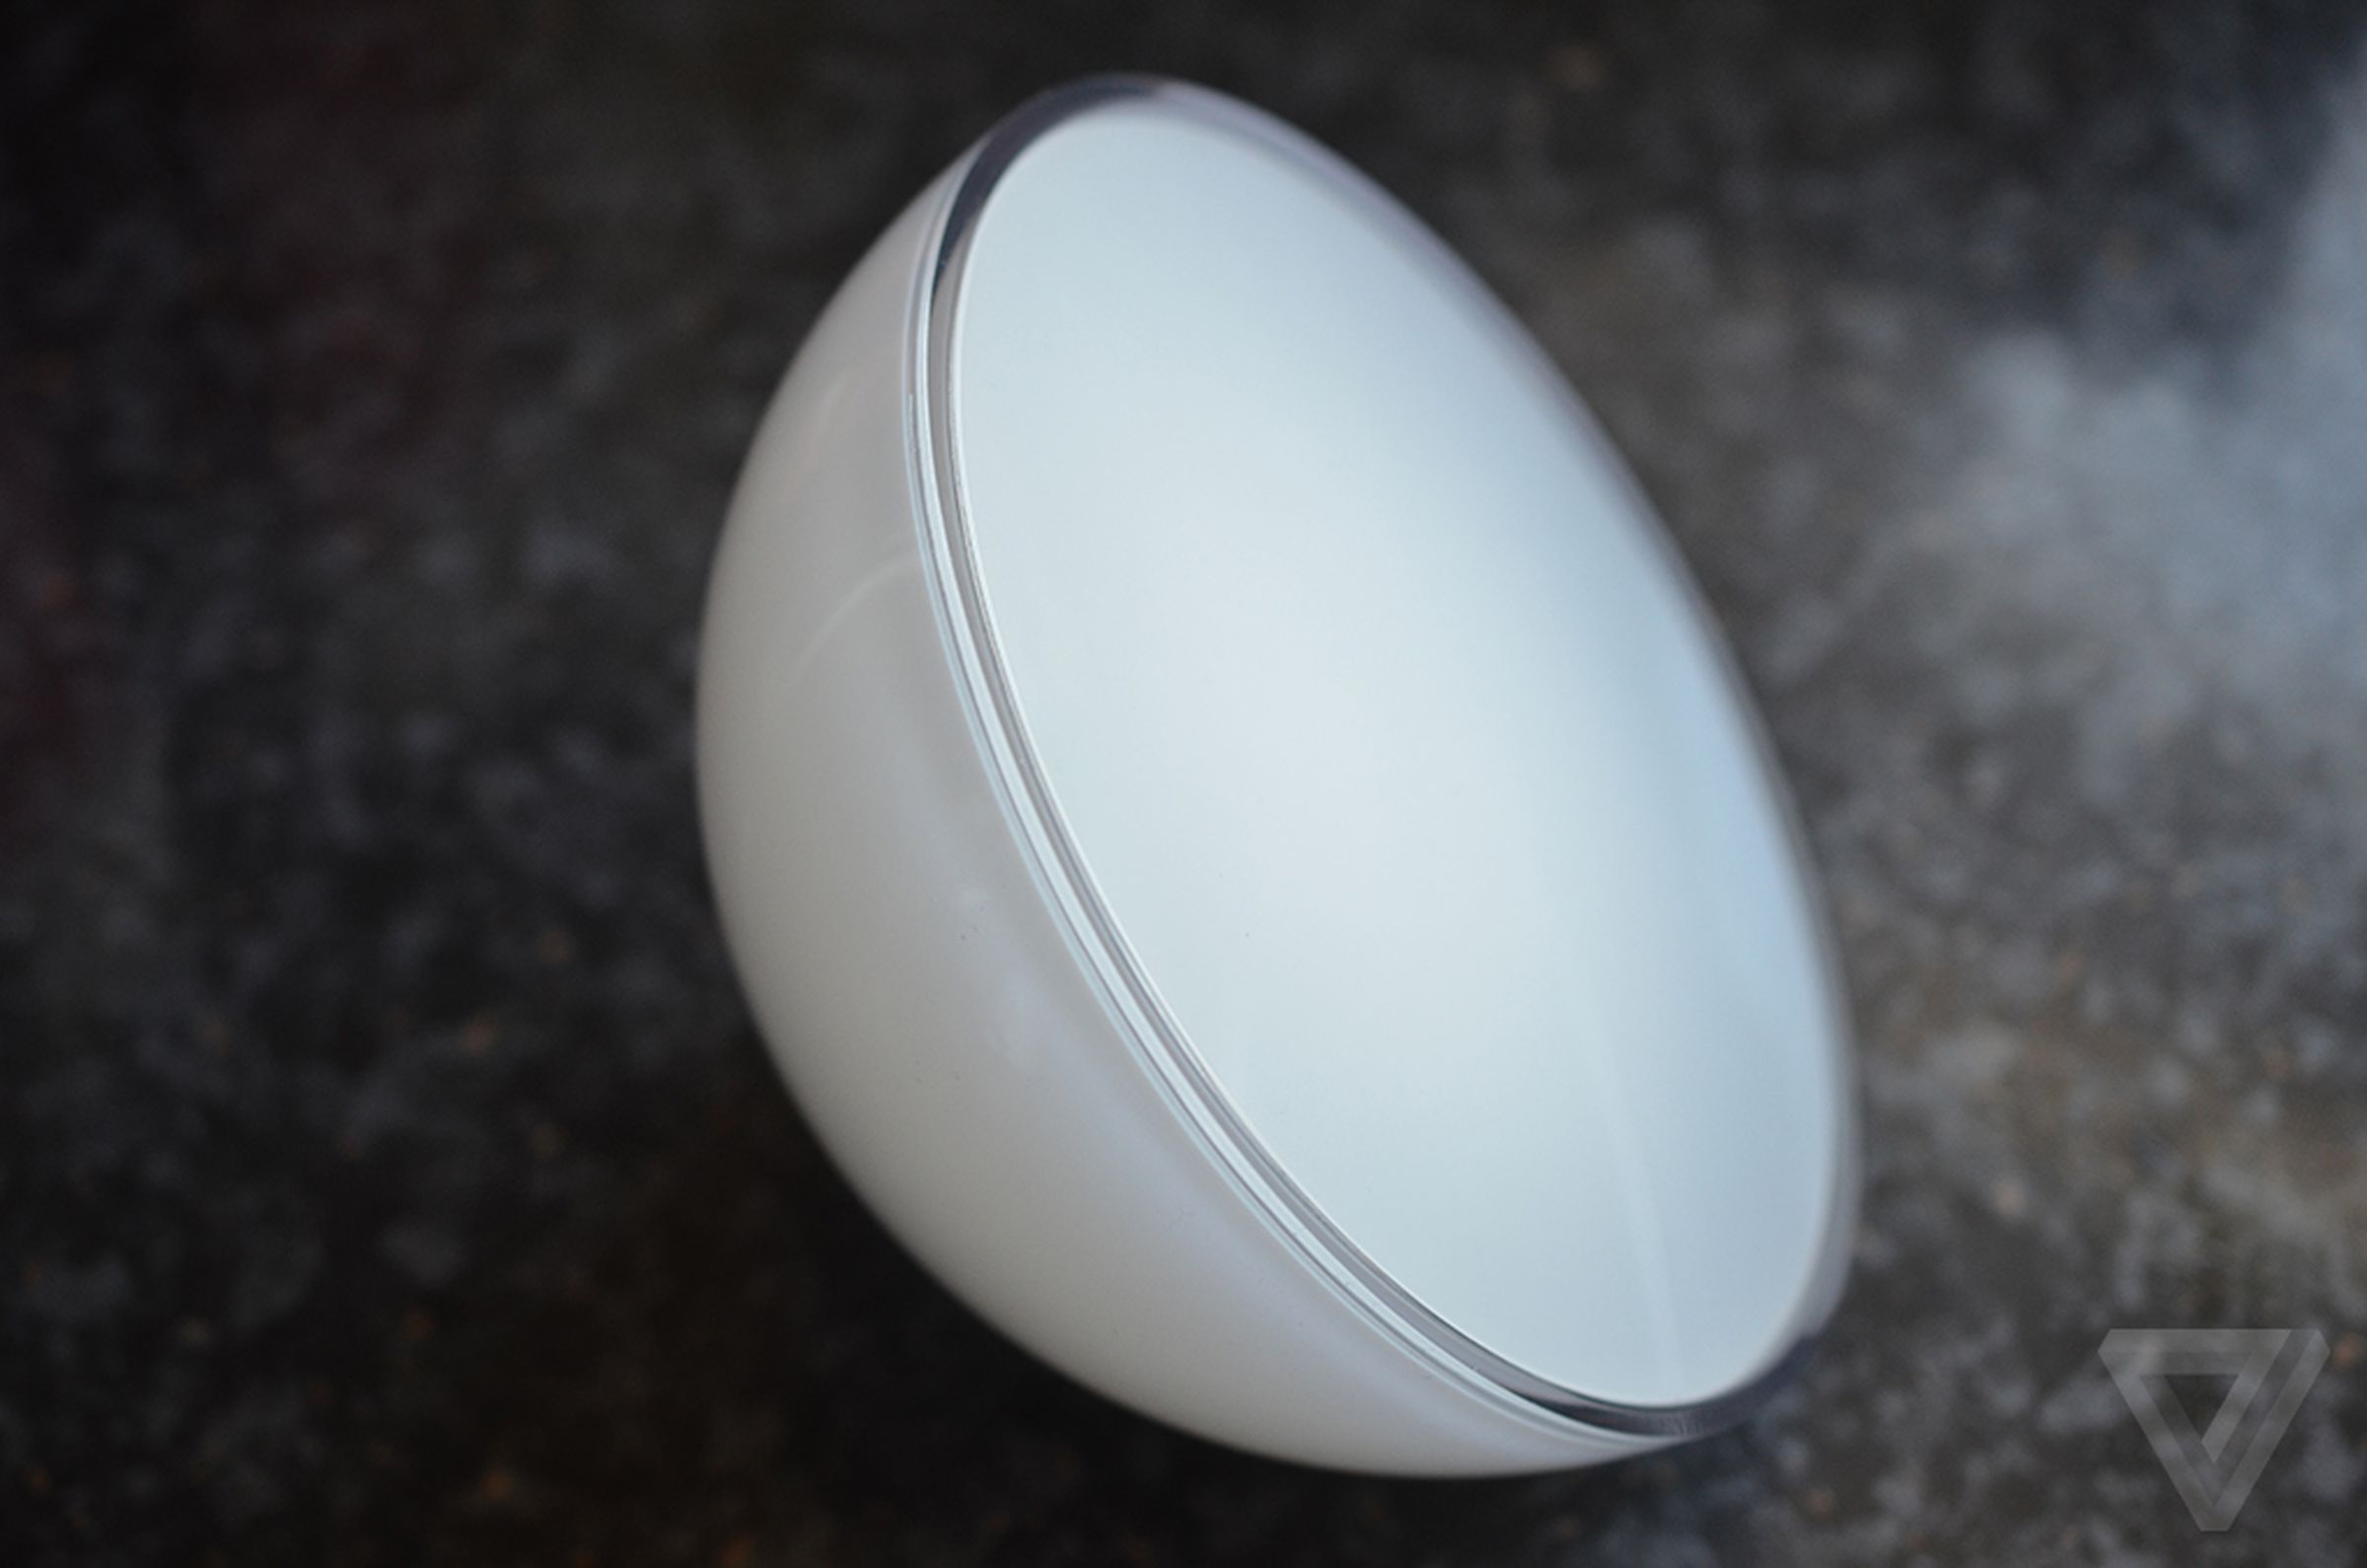 Philips Hue Go hands-on pictures